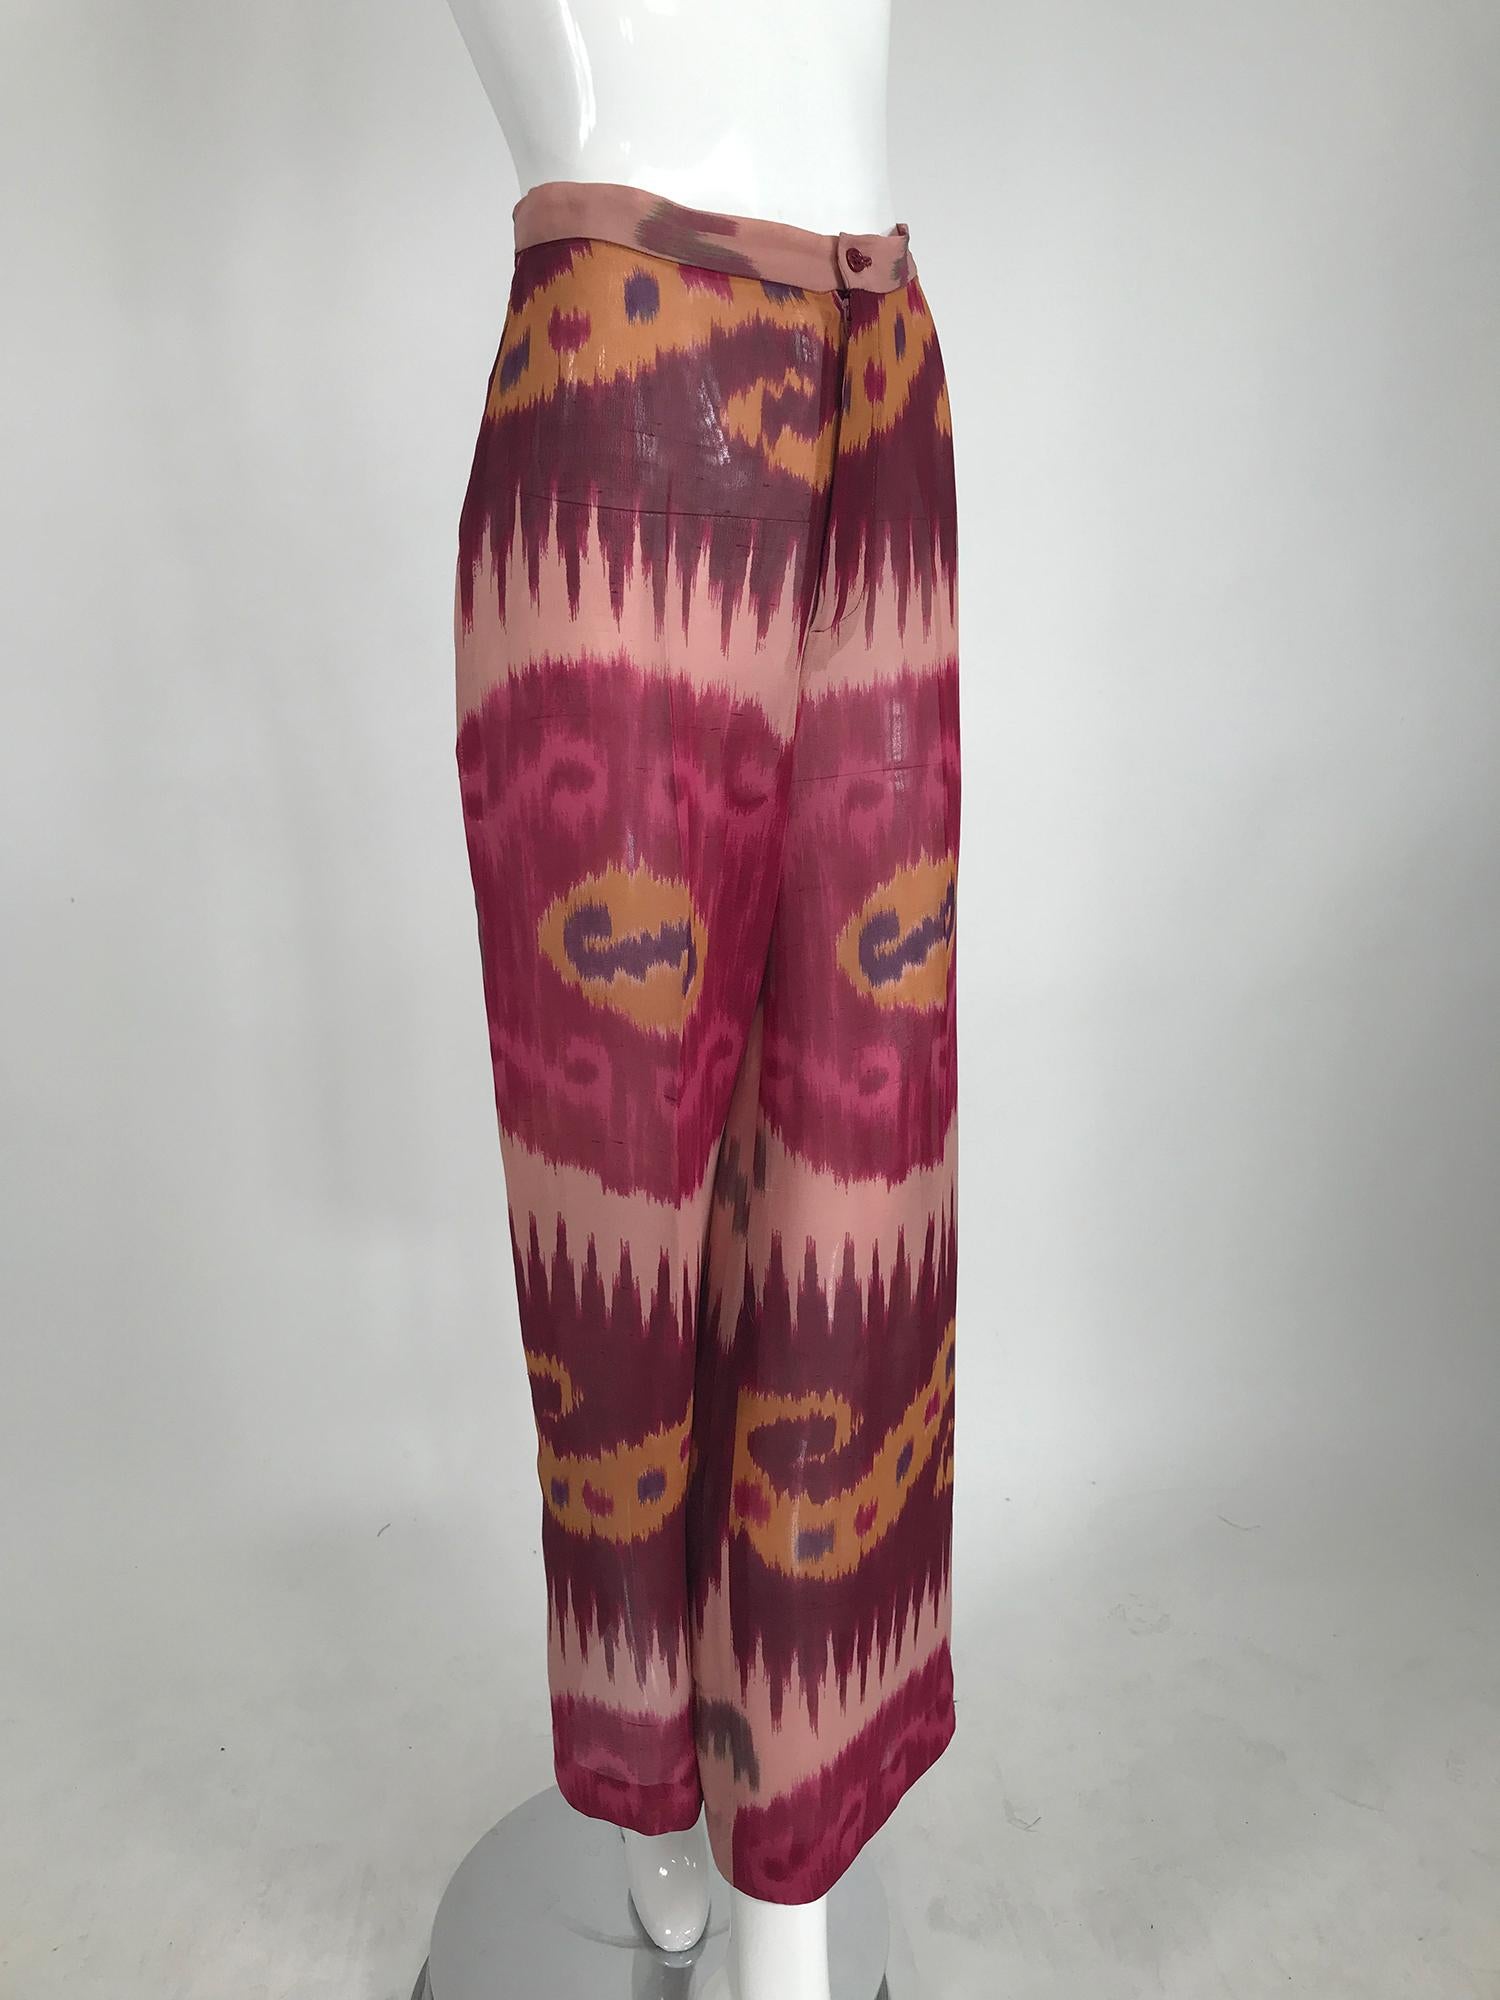 Ralph Laurent Collection, silk ikat printed wide leg trouser in silk chiffon. Beautiful and perfect for any occasion. Fly front, banded waist with button closure. Wide full legs. Sheer and unlined. Marked size 2.
In excellent wearable condition. All